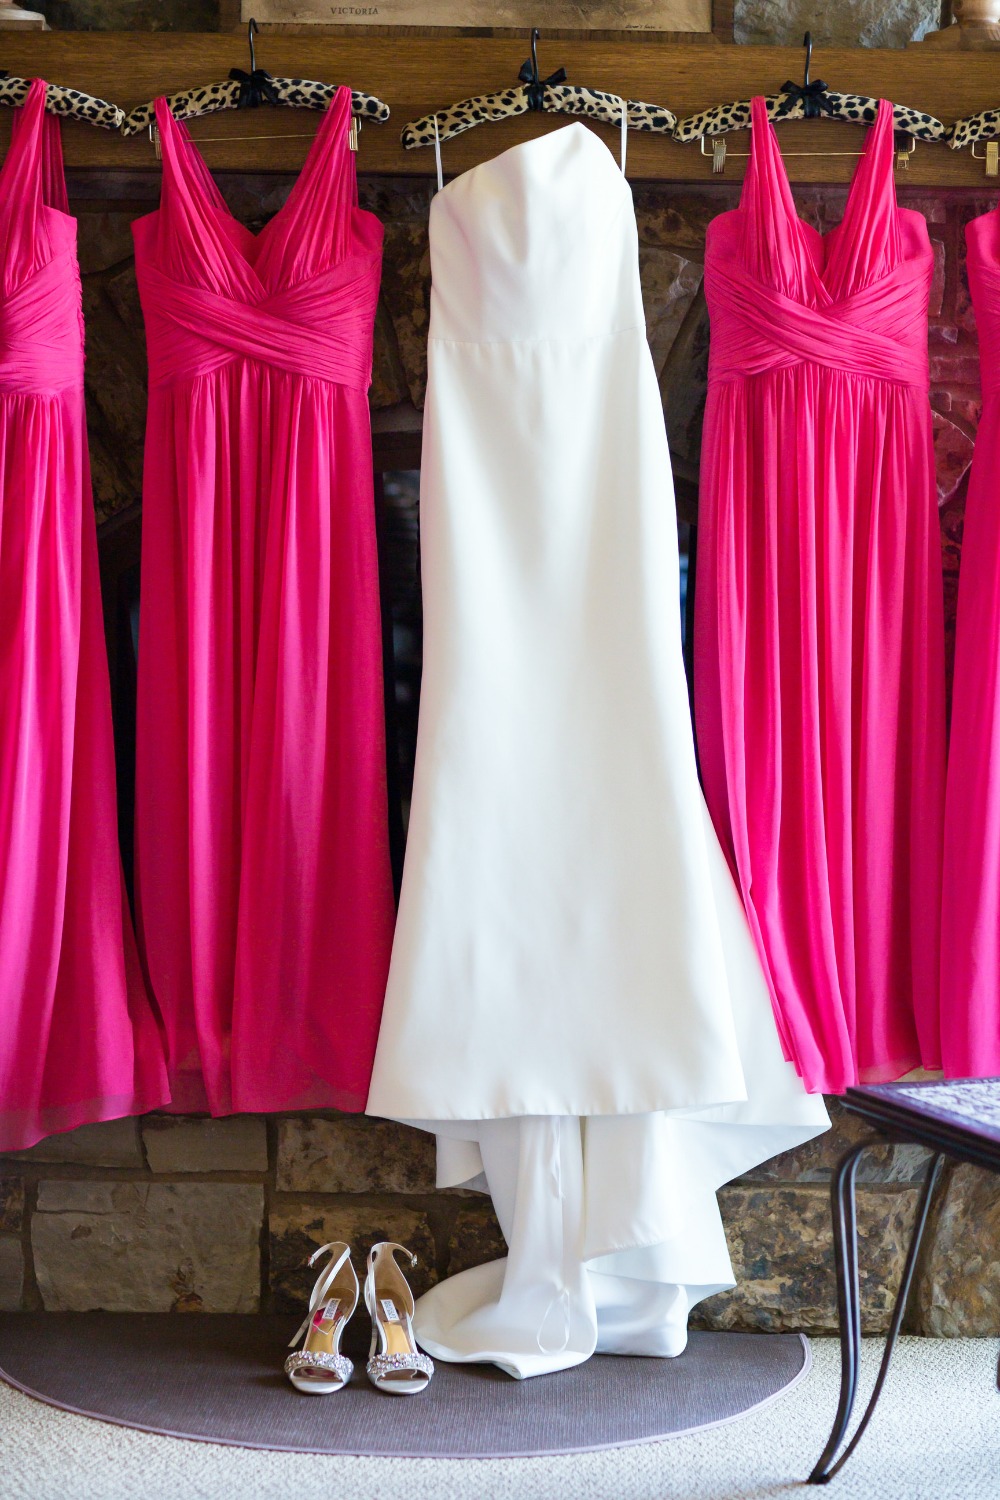 hot pink wedding party